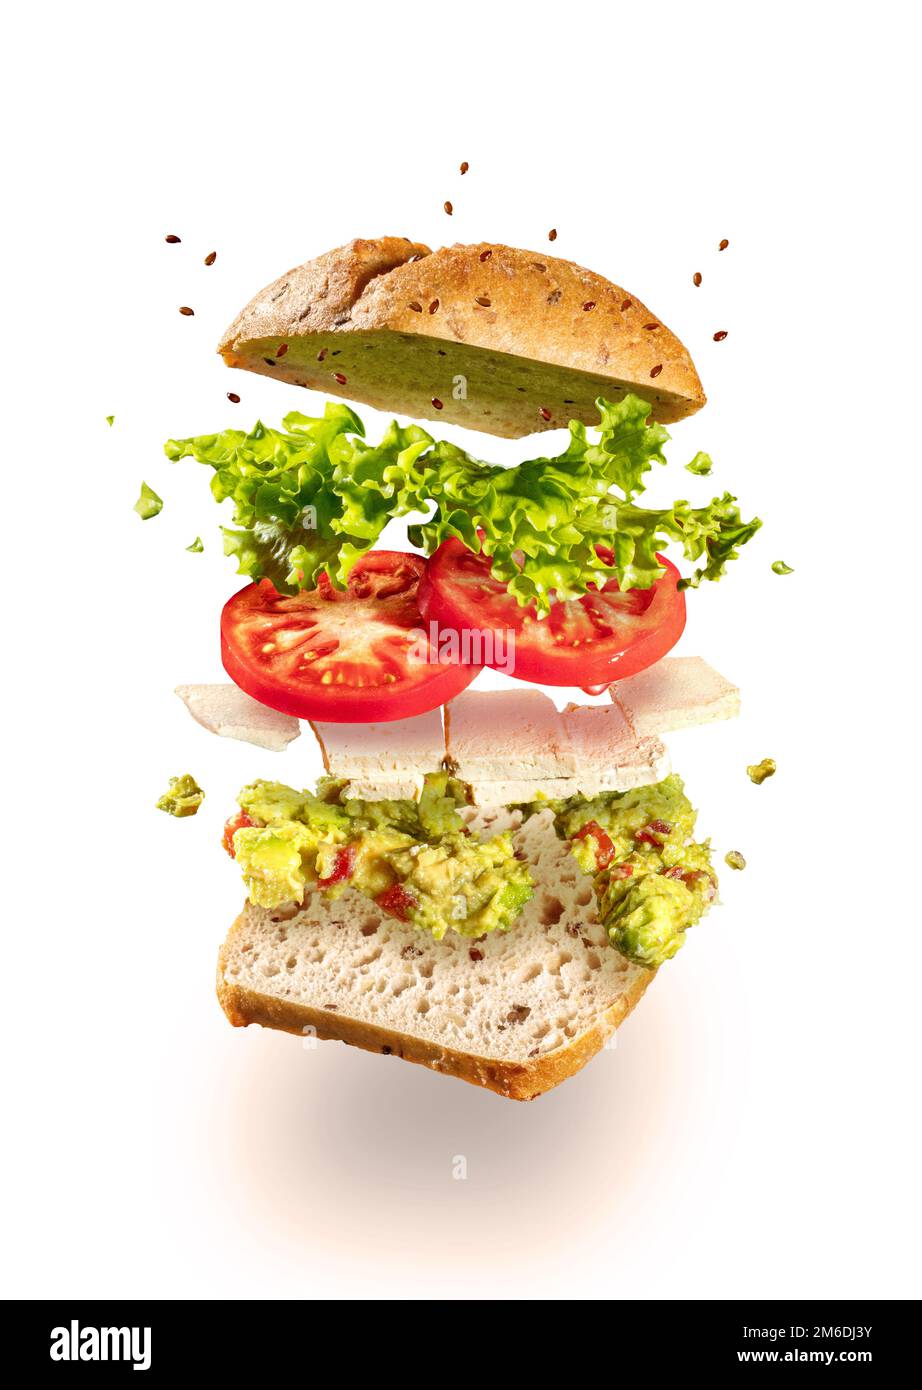 Exploded vegetarian sandwich with guacamole and tofu on white Stock Photo